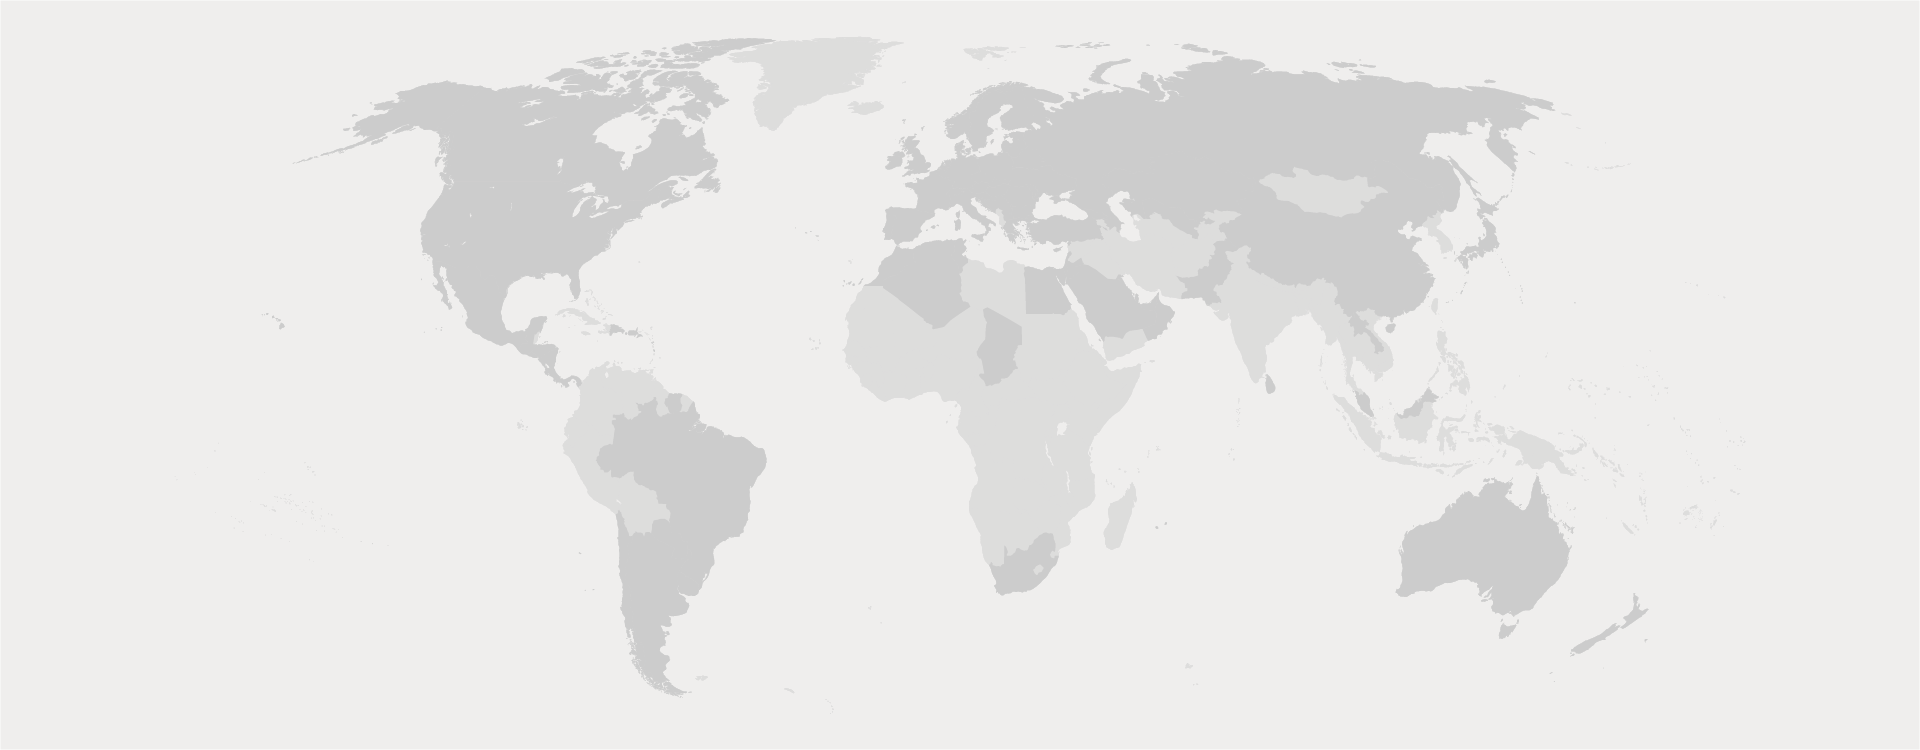 RK World Map - 35,000 projects in over 90 countries